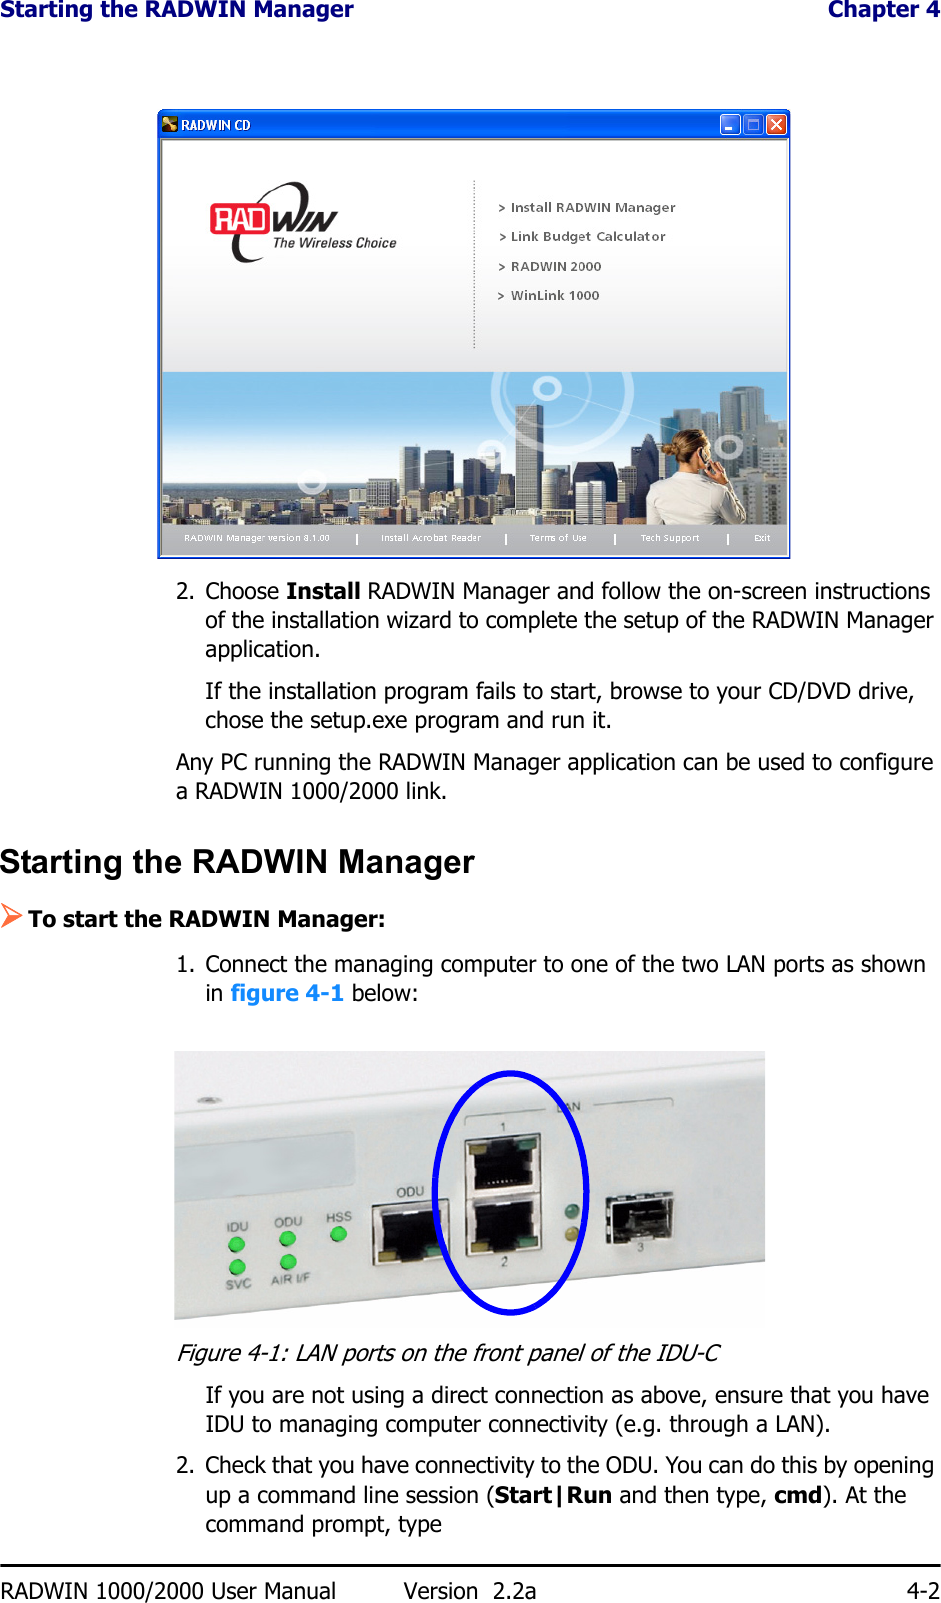 Starting the RADWIN Manager  Chapter 4RADWIN 1000/2000 User Manual Version  2.2a 4-22. Choose Install RADWIN Manager and follow the on-screen instructions of the installation wizard to complete the setup of the RADWIN Manager application.If the installation program fails to start, browse to your CD/DVD drive, chose the setup.exe program and run it.Any PC running the RADWIN Manager application can be used to configure a RADWIN 1000/2000 link.Starting the RADWIN Manager ¾To start the RADWIN Manager:1. Connect the managing computer to one of the two LAN ports as shown in figure 4-1 below:Figure 4-1: LAN ports on the front panel of the IDU-CIf you are not using a direct connection as above, ensure that you have IDU to managing computer connectivity (e.g. through a LAN).2. Check that you have connectivity to the ODU. You can do this by opening up a command line session (Start|Run and then type, cmd). At the command prompt, type